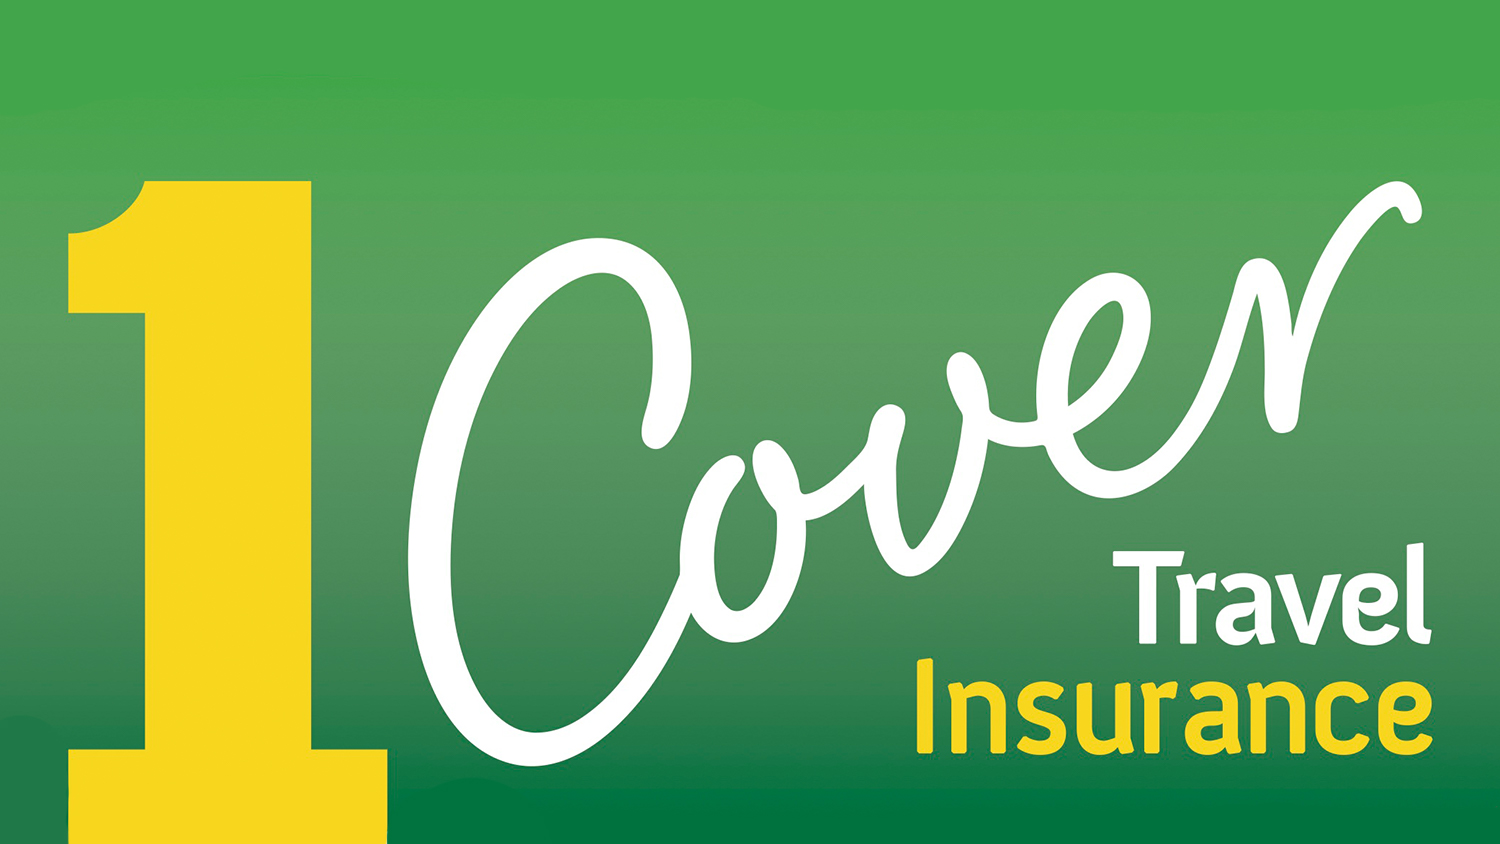 1cover travel insurance product review